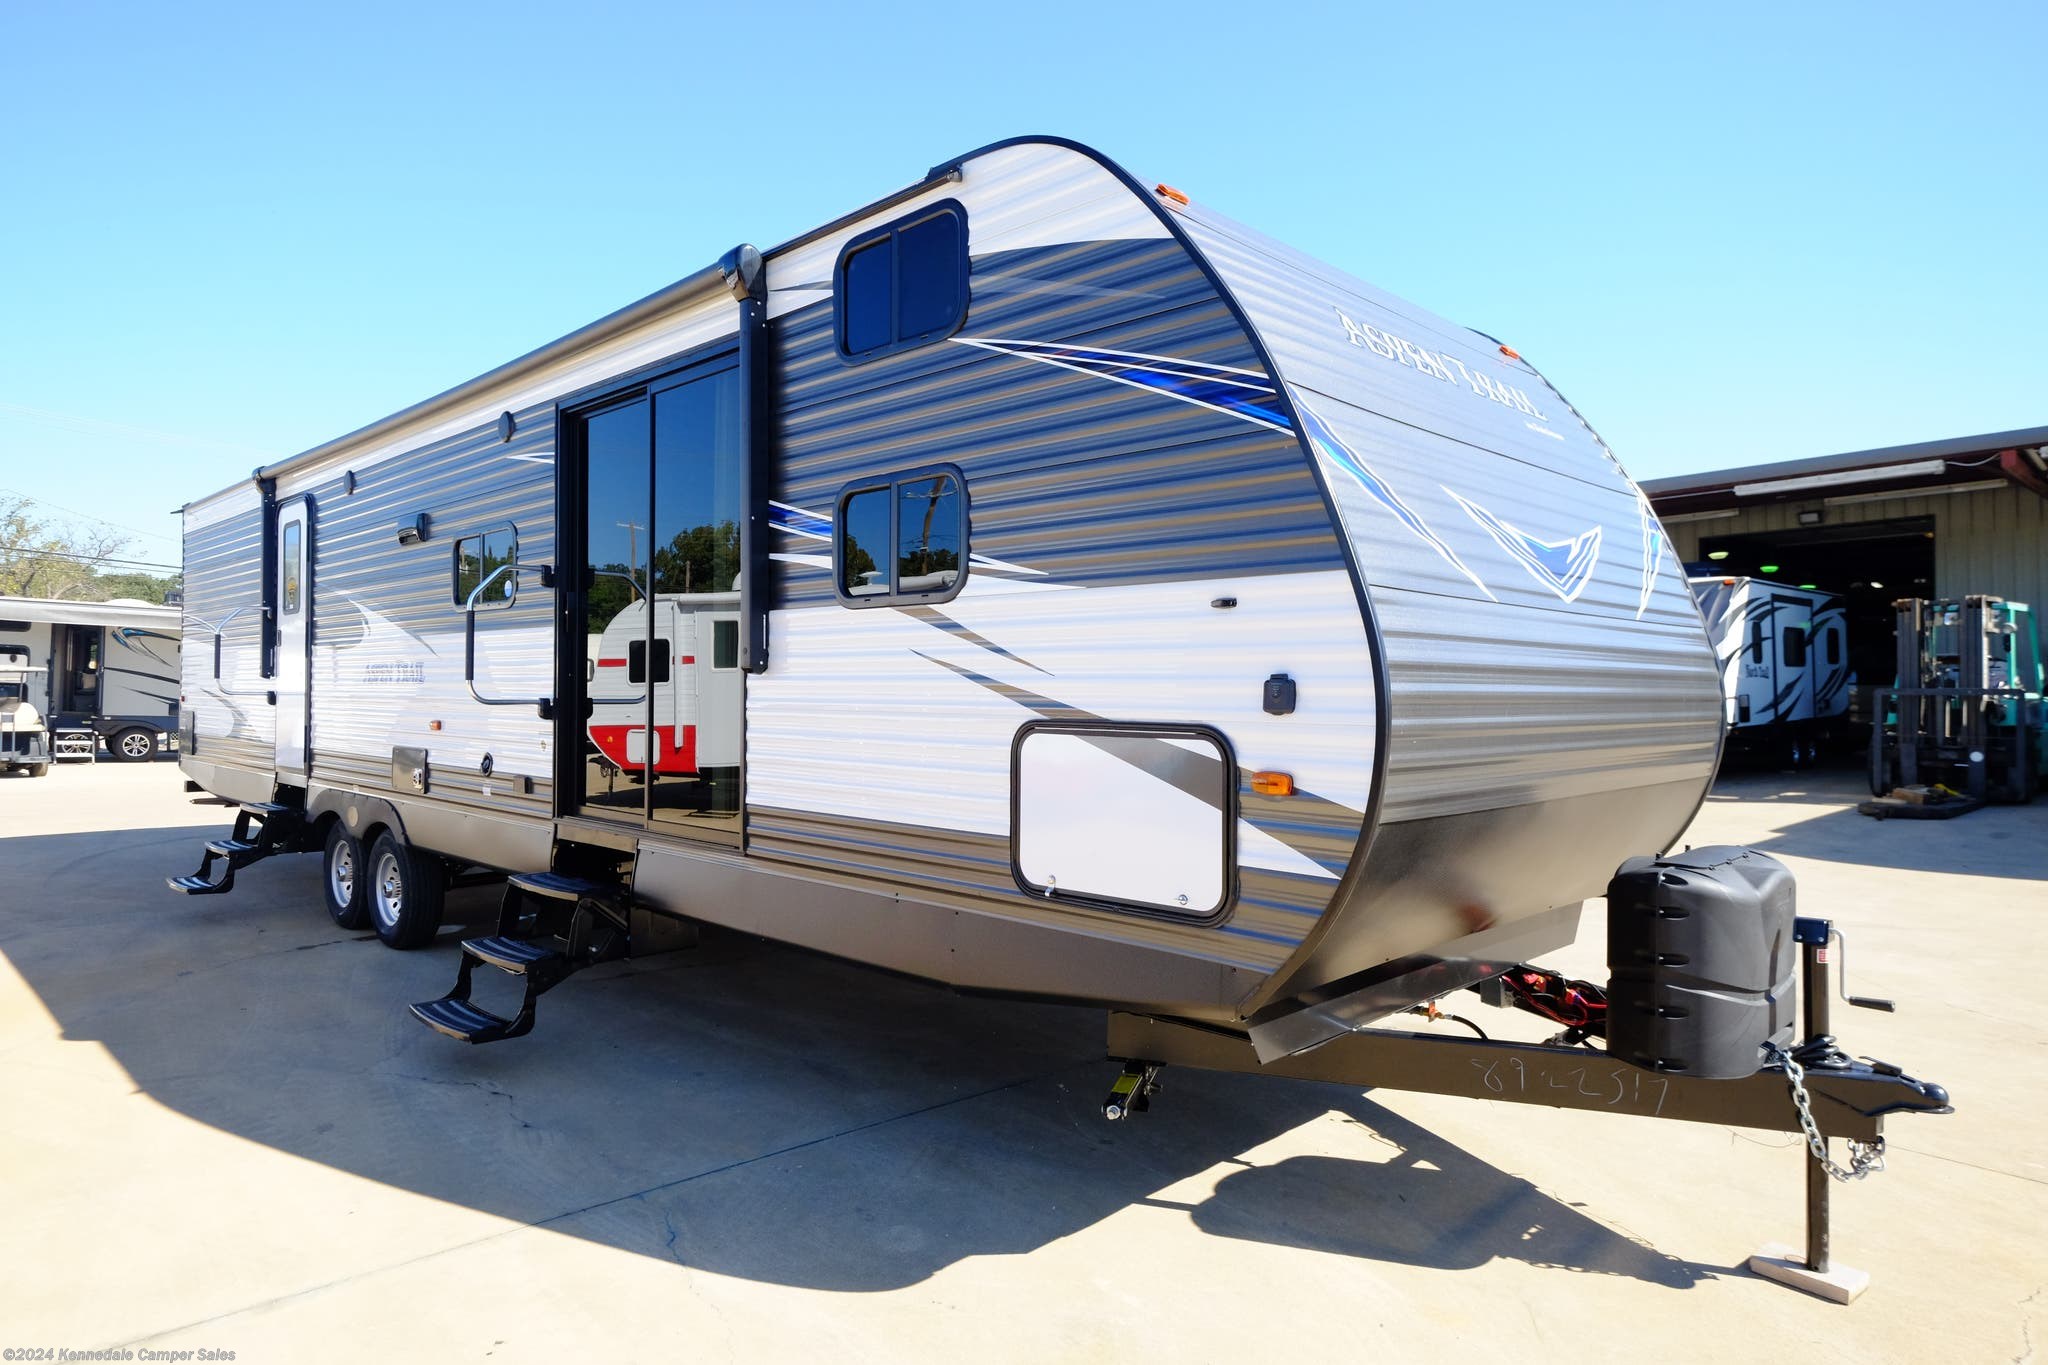 2 Bedroom Rv For Sale Texas Search your favorite Image